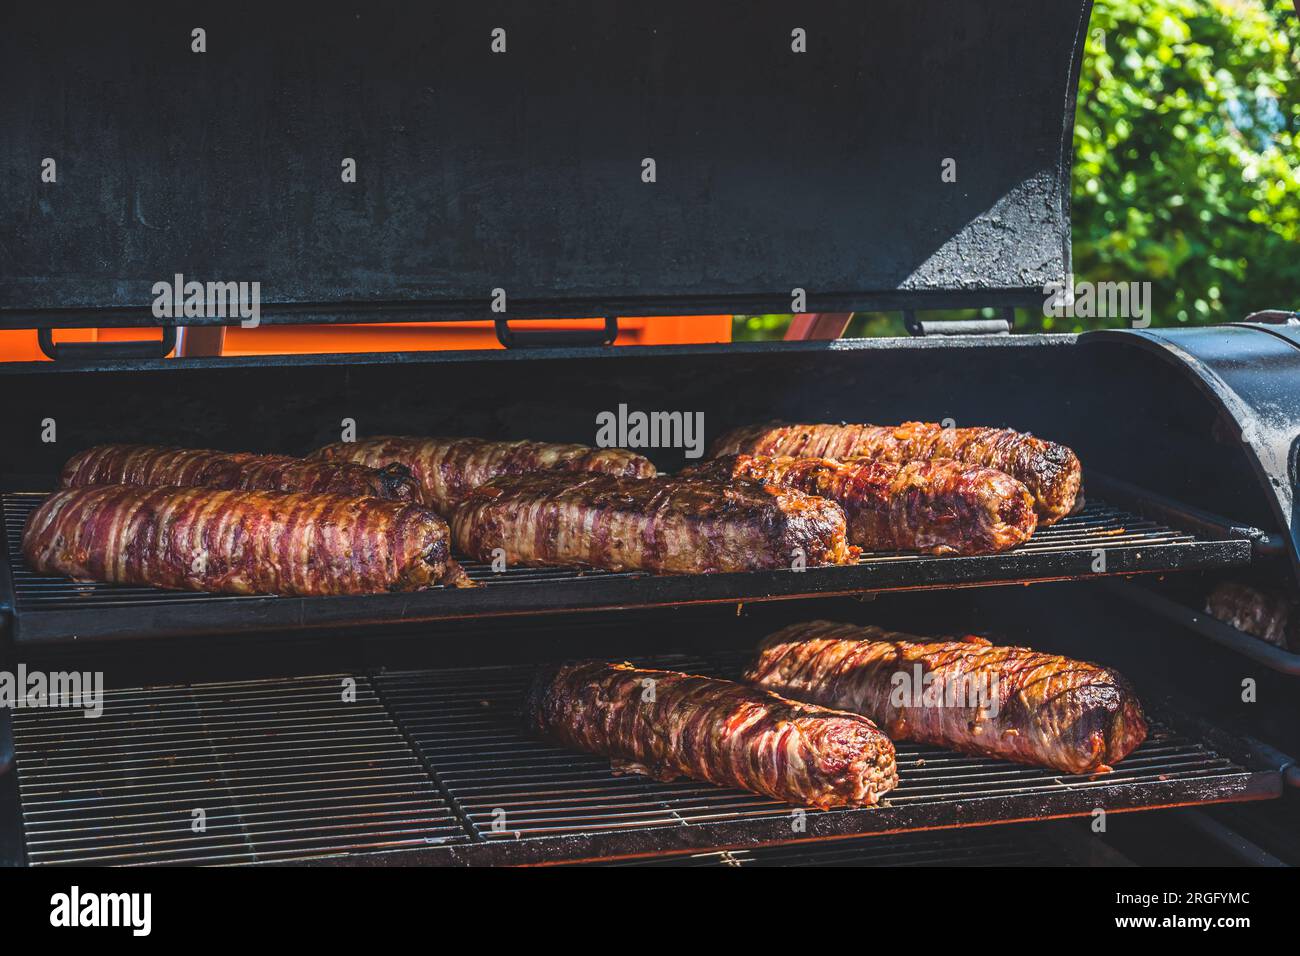 Large Barbecue Smoker Grill At The Park Meat Prepared In Barbecue Smoker  Stock Photo - Download Image Now - iStock